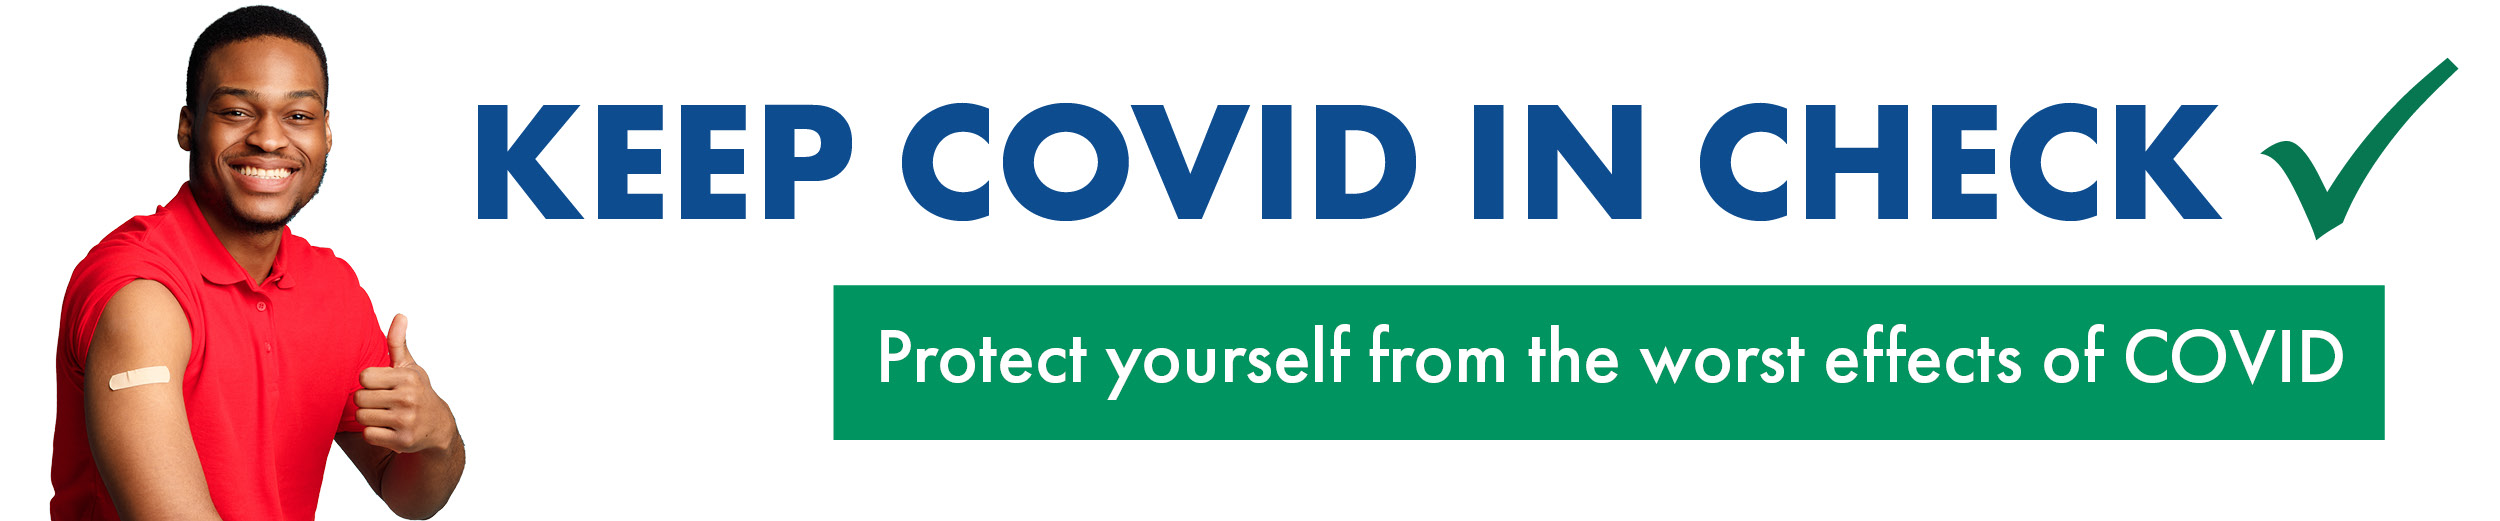 *Man in red shirt with thumbs up and bandage on arm from vaccination* Keep Covid in Check - Protect yourself from the worst effects of COVID - Get protected from the worst effects of COVID. 